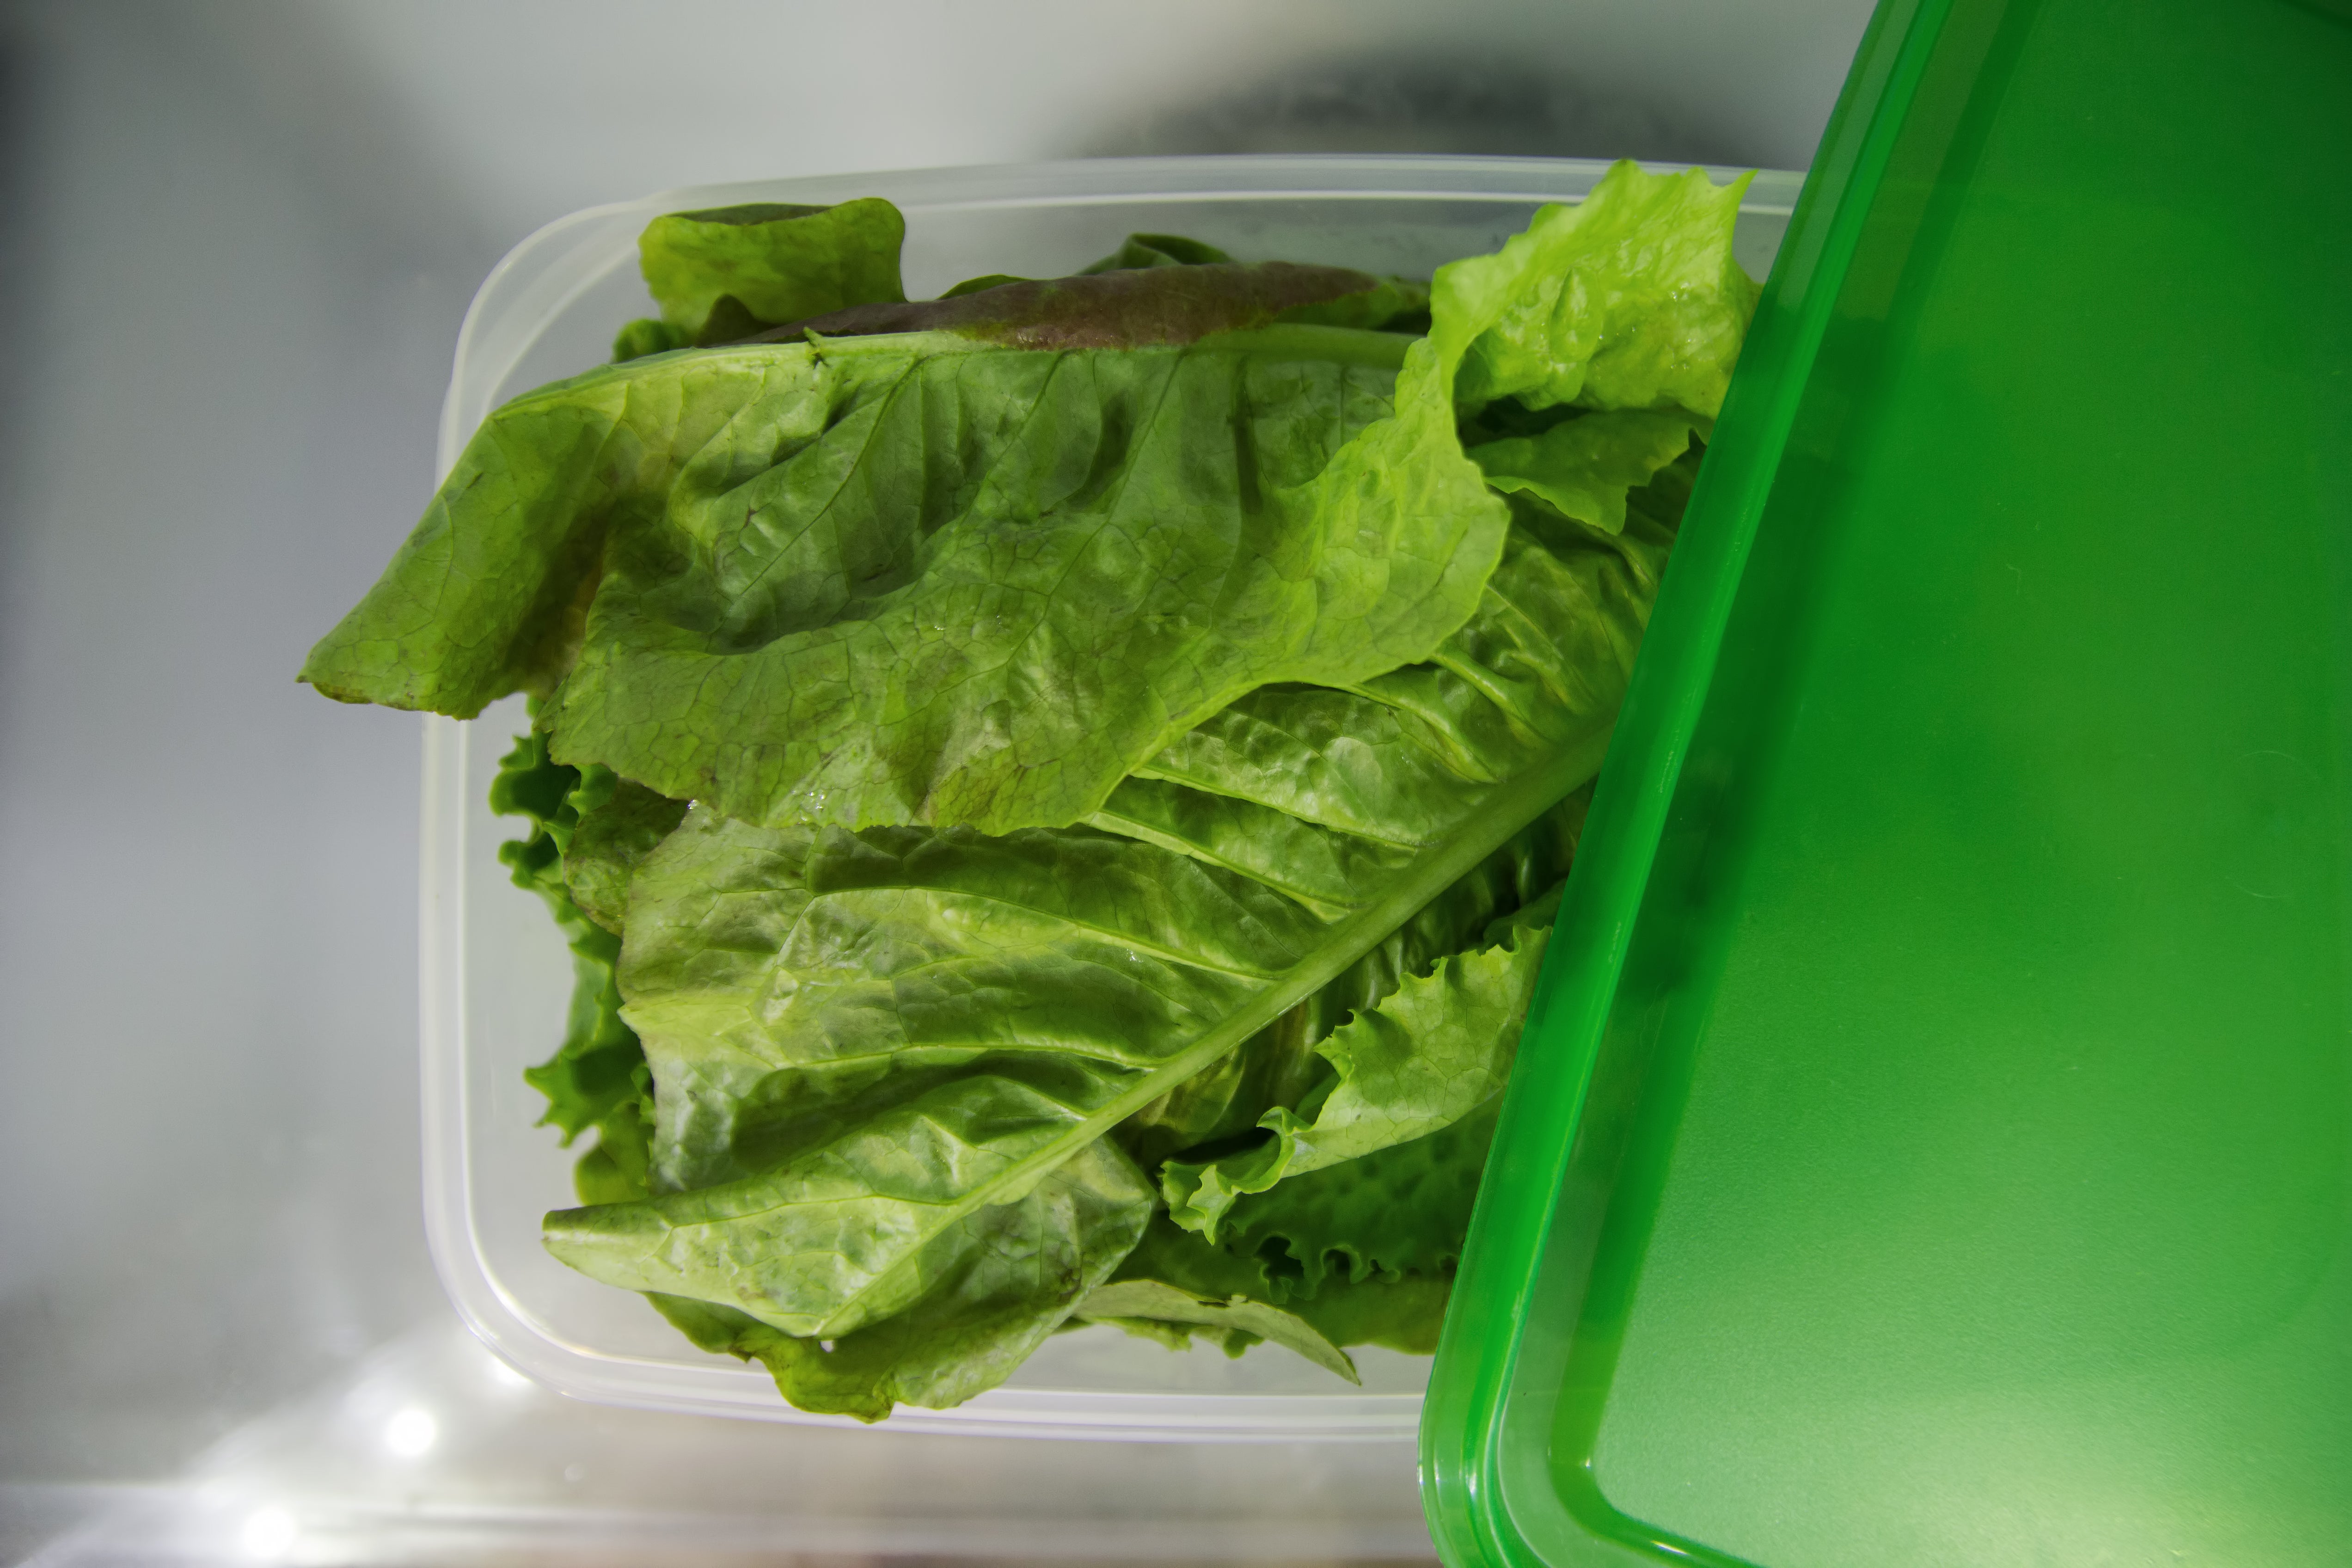 Loose leaves are best kept in a hard, sealed container